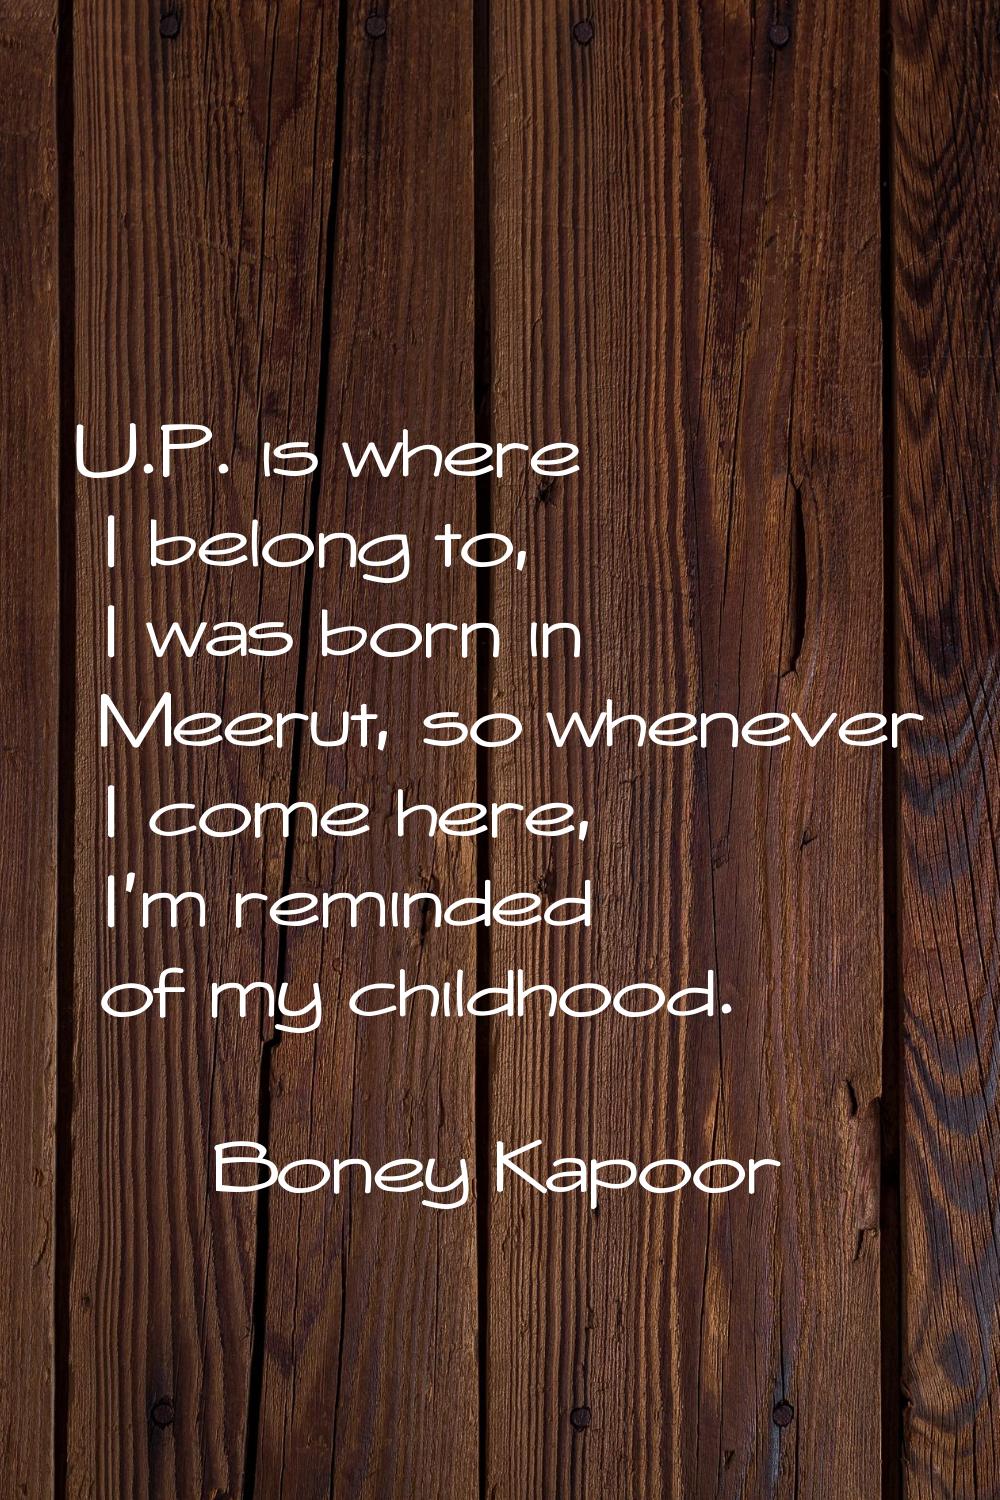 U.P. is where I belong to, I was born in Meerut, so whenever I come here, I'm reminded of my childh